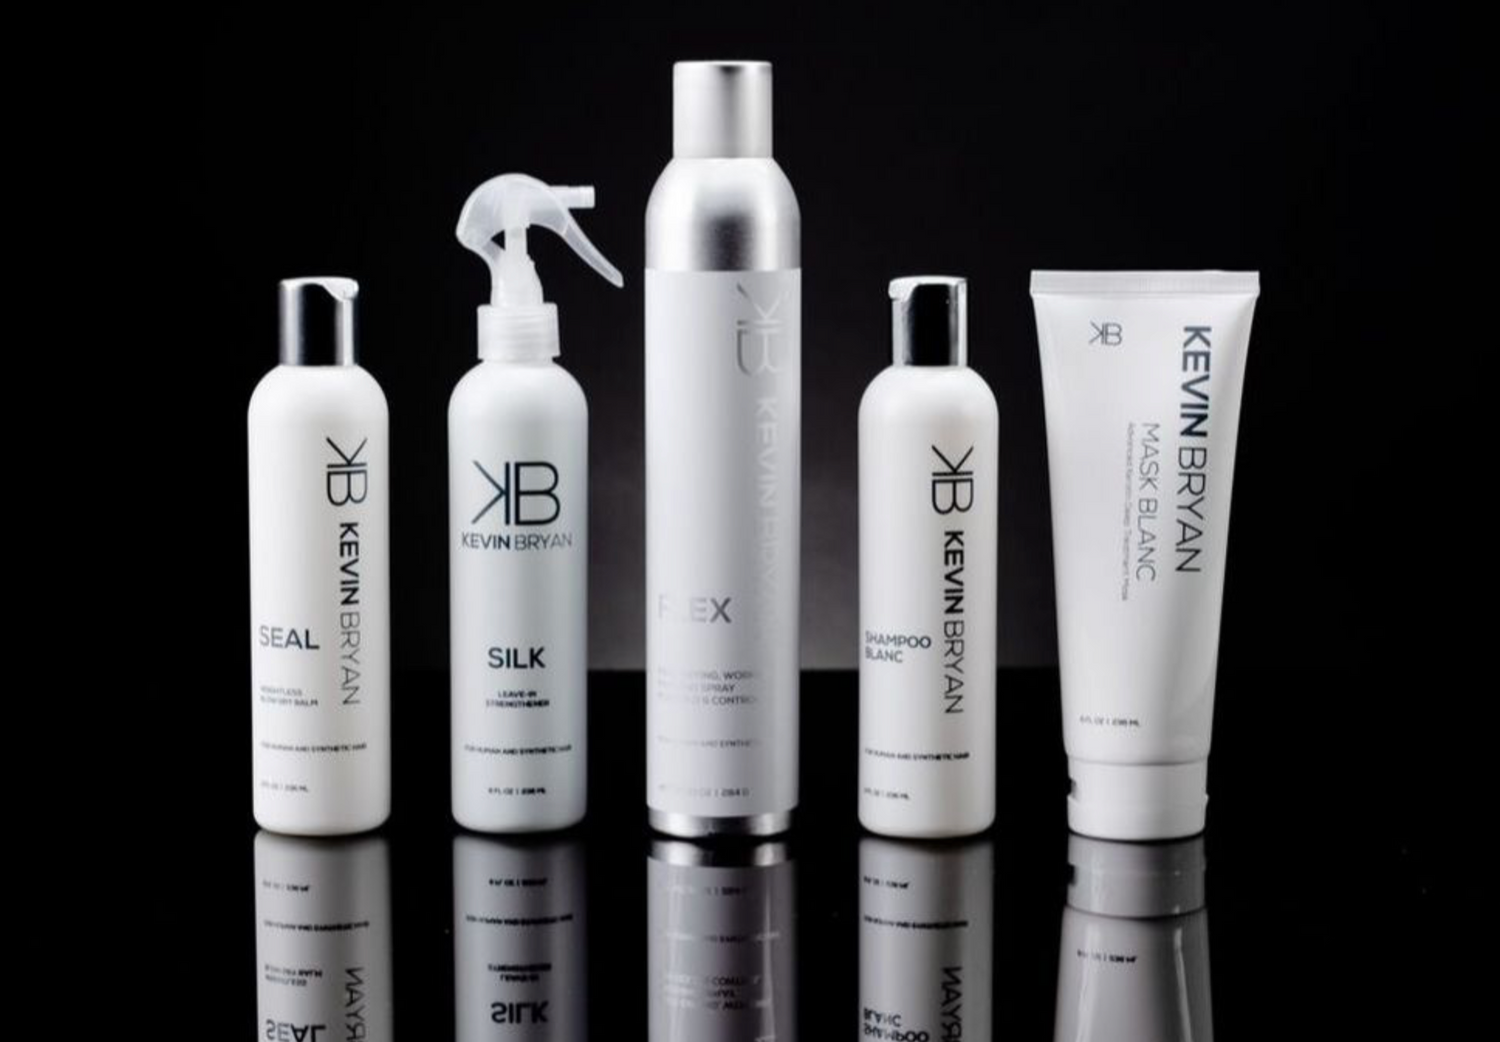 Kevin Brian hair product line